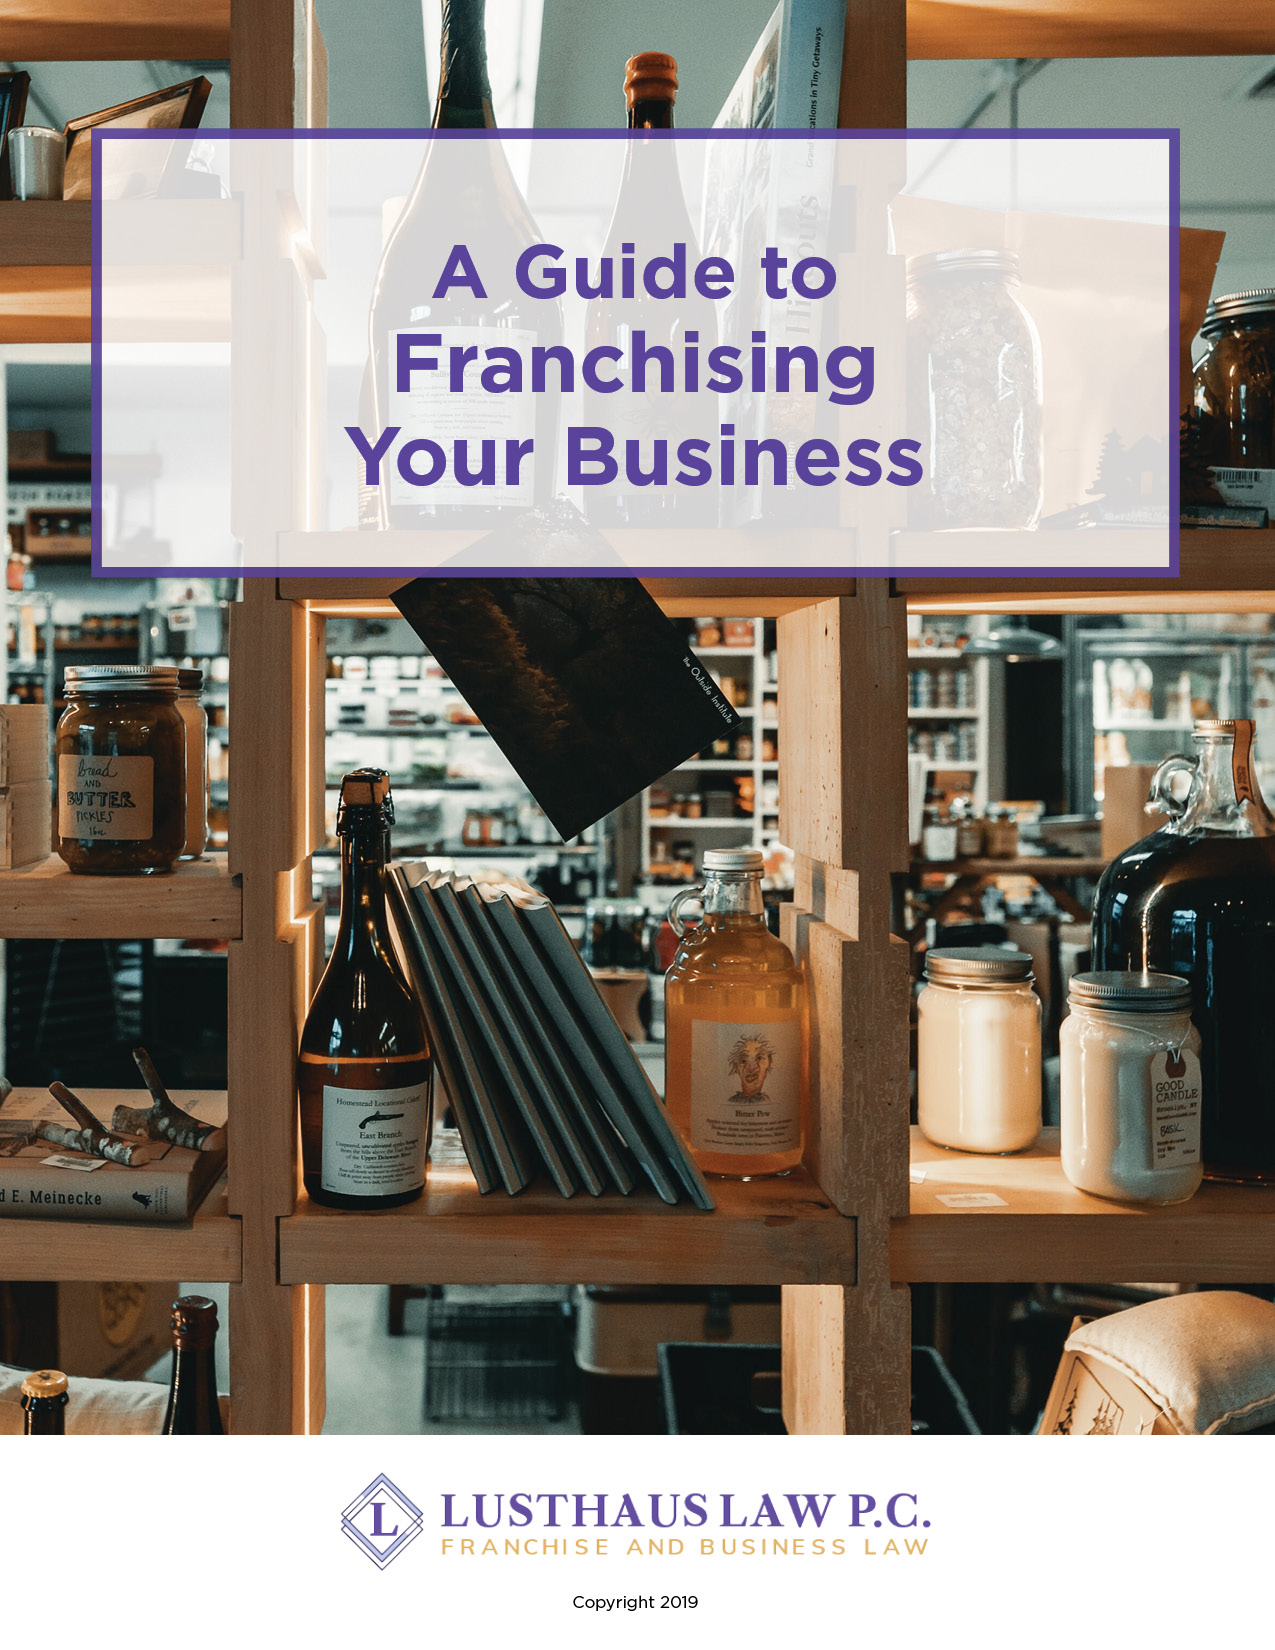 Lusthaus_Ebook_A-Guide-To-Franchising-Your-Business_Final